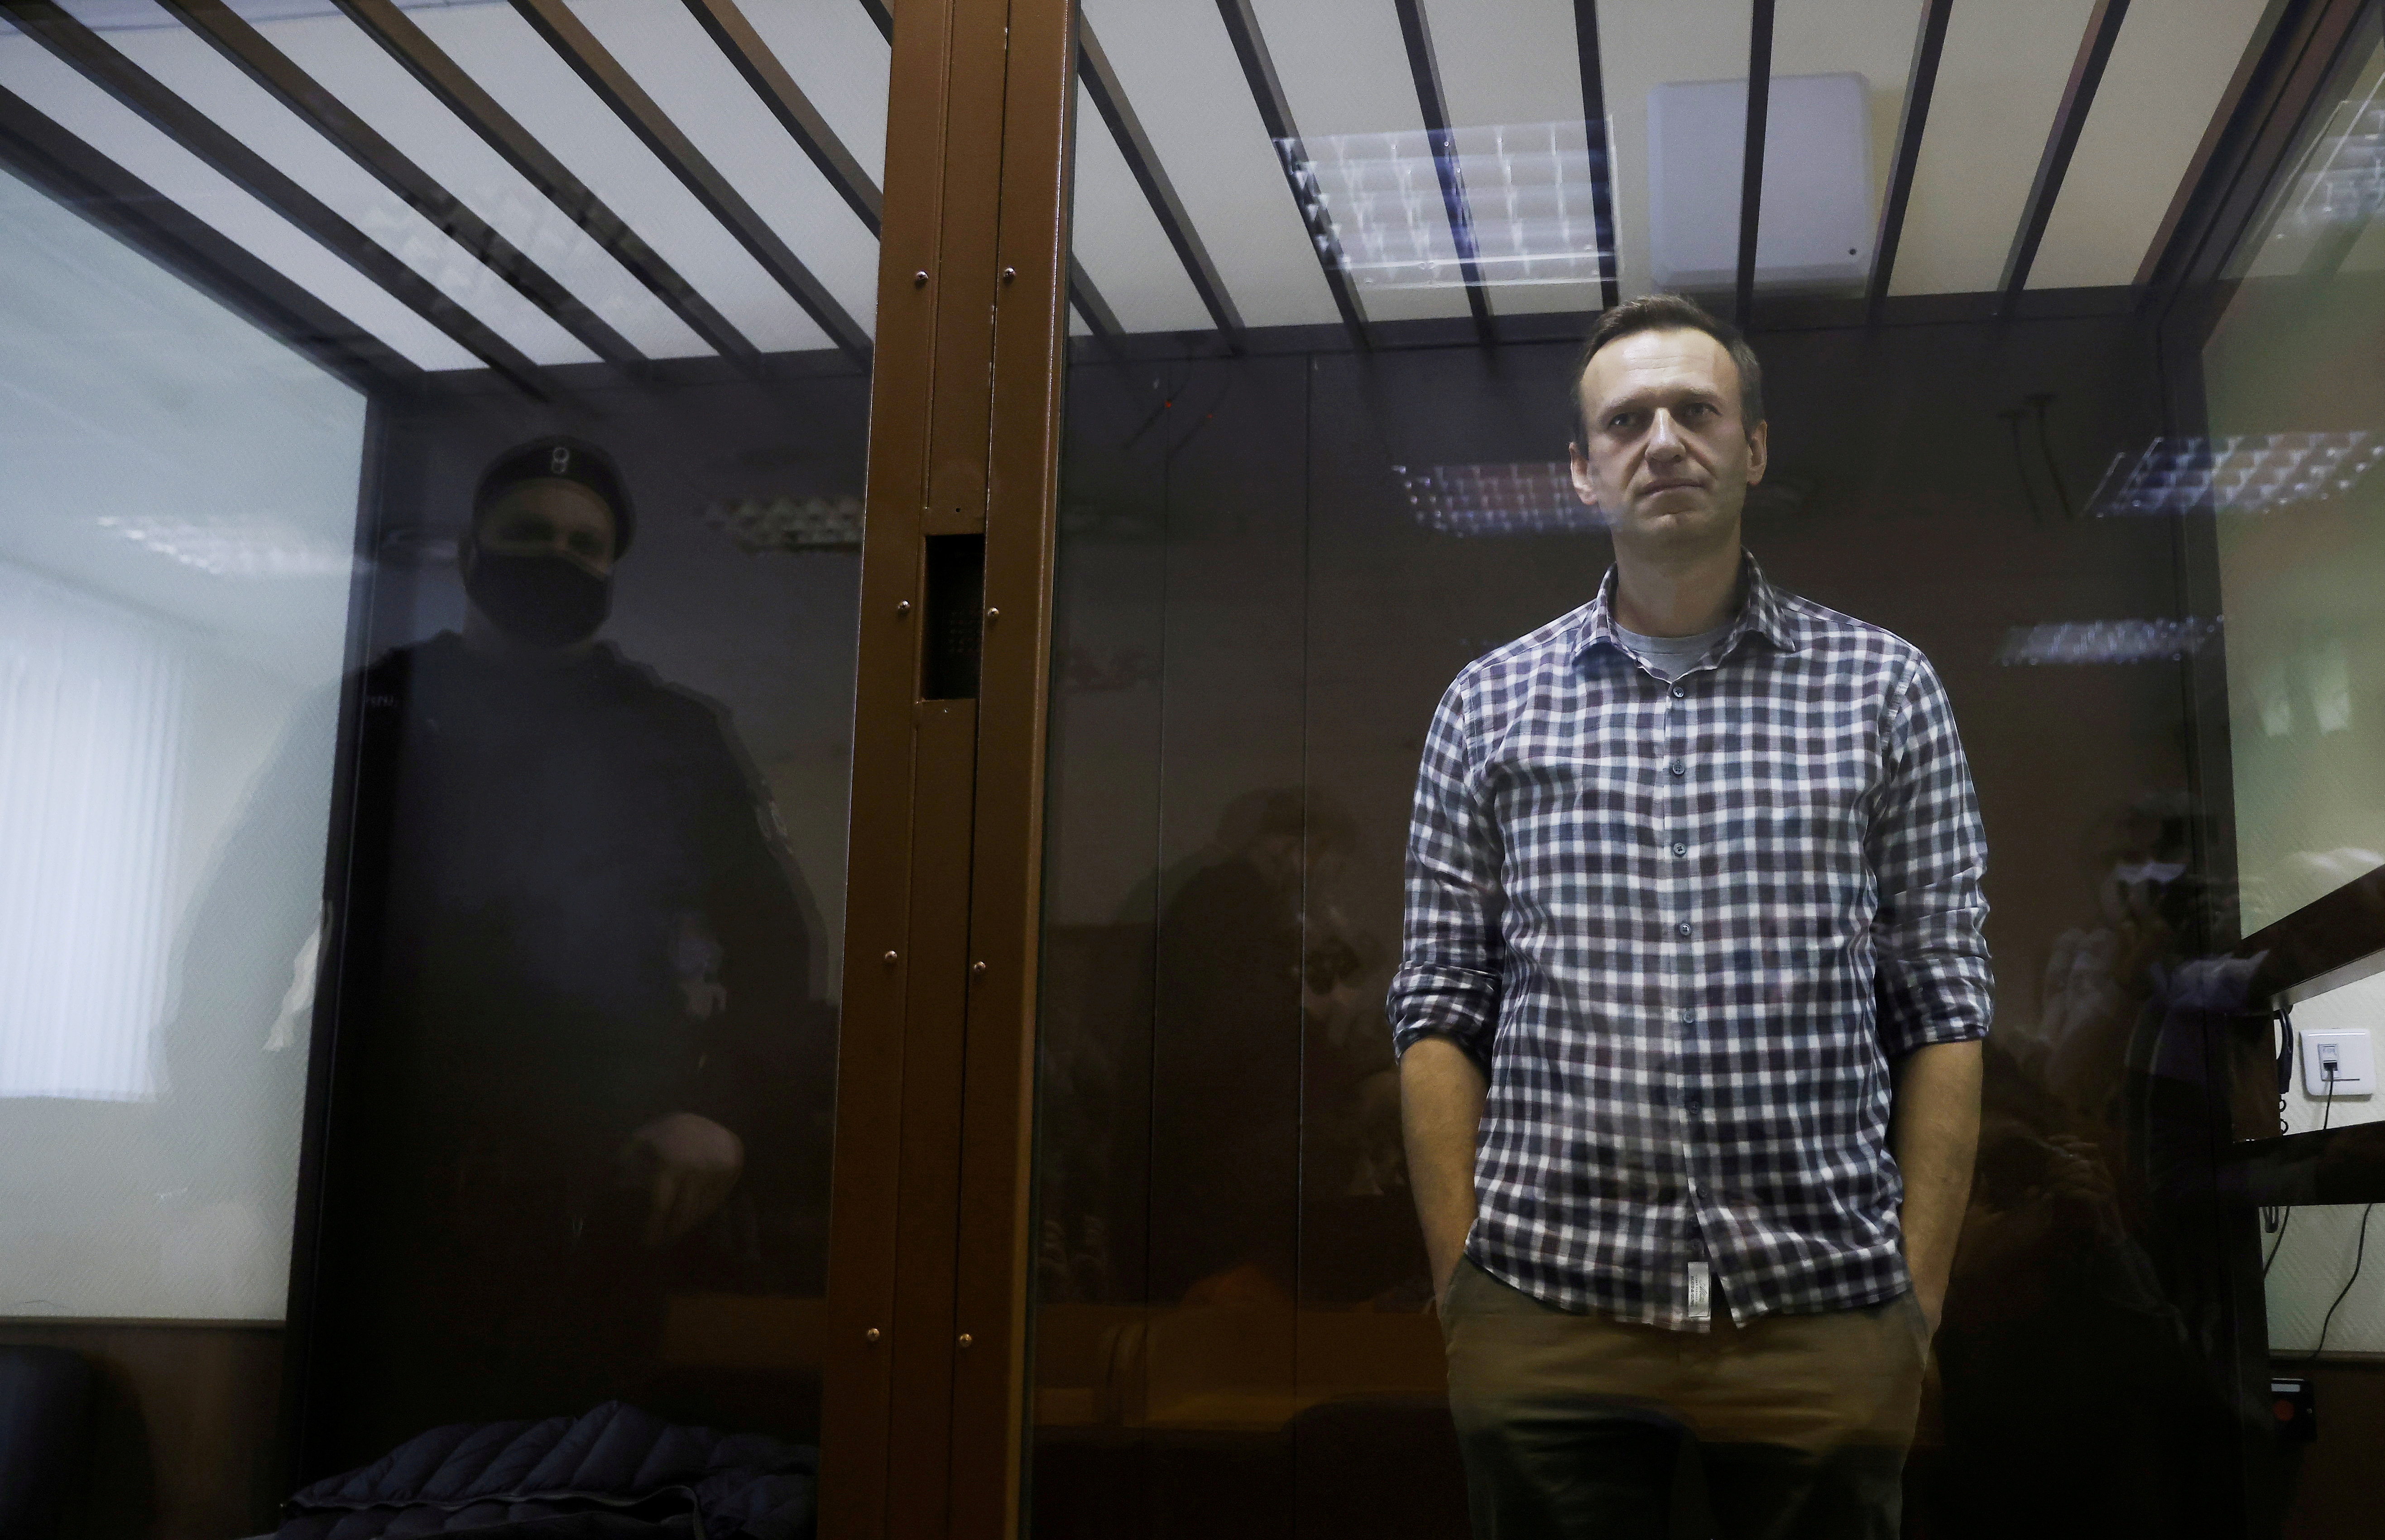 Russian opposition politician Alexei Navalny attends a court hearing in Moscow